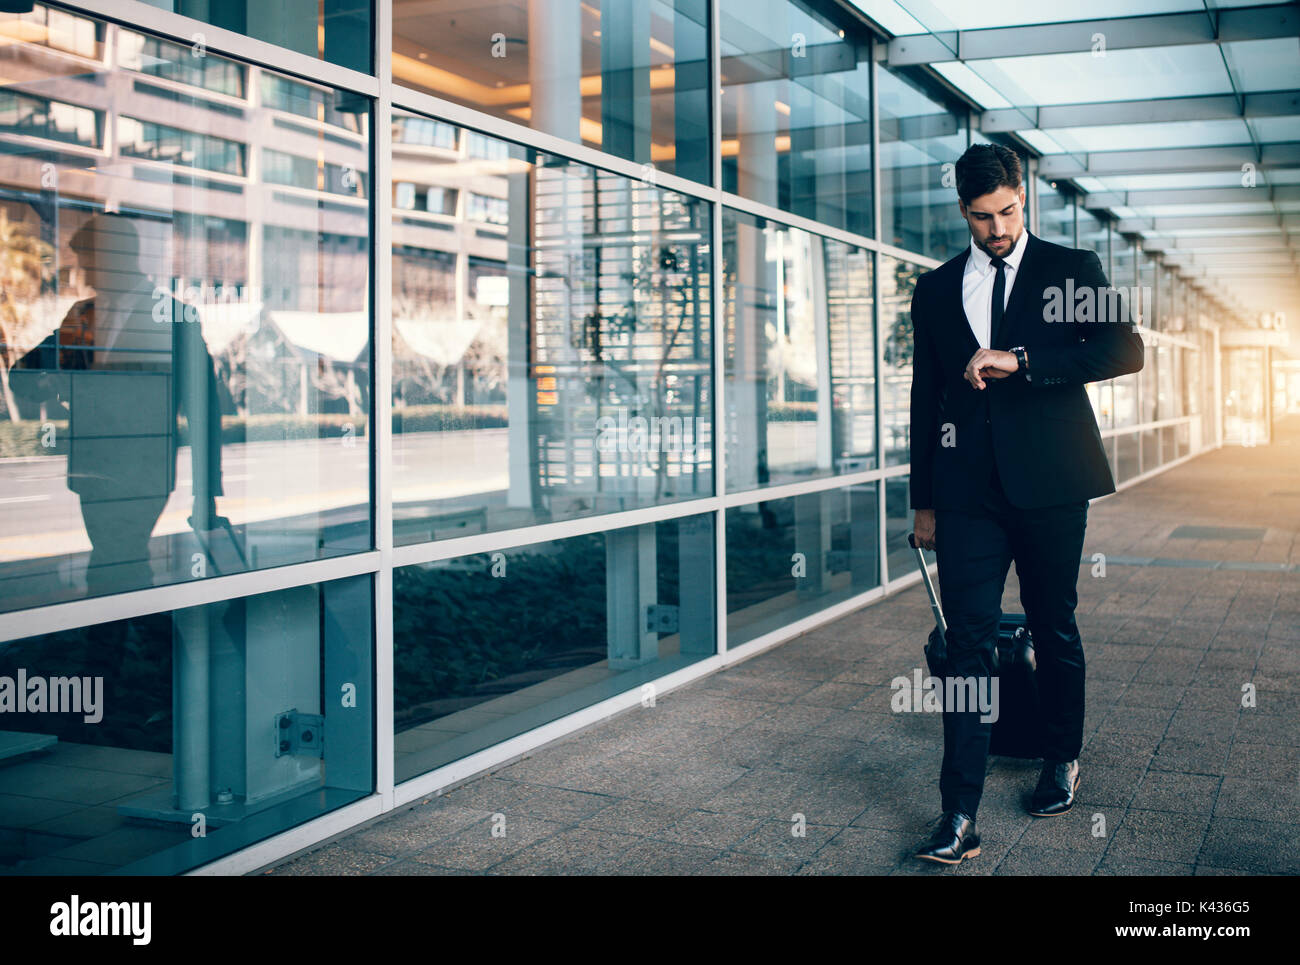 Businessman carrying a suitcase and looking at his watch while walking in airport. Business traveler checking time on his wristwatch. Stock Photo